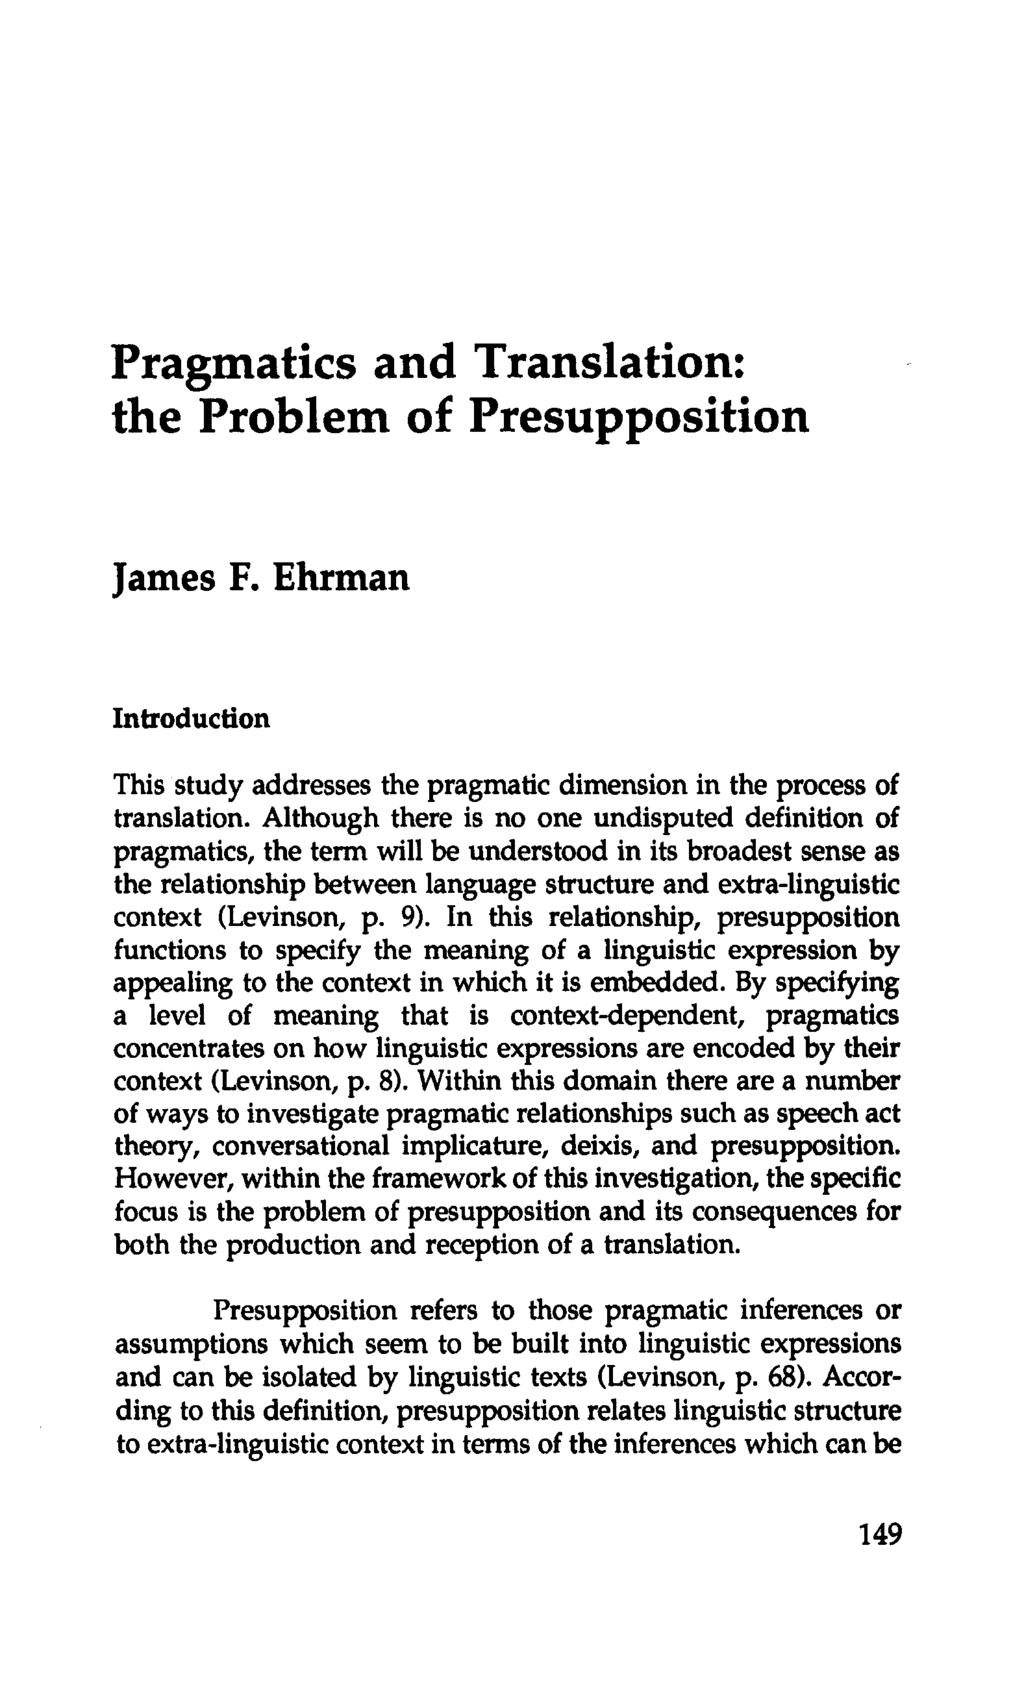 Pragmatics and Translation: the Problem of Presupposition James F. Ehrman Introduction This study addresses the pragmatic dimension in the process of translation.